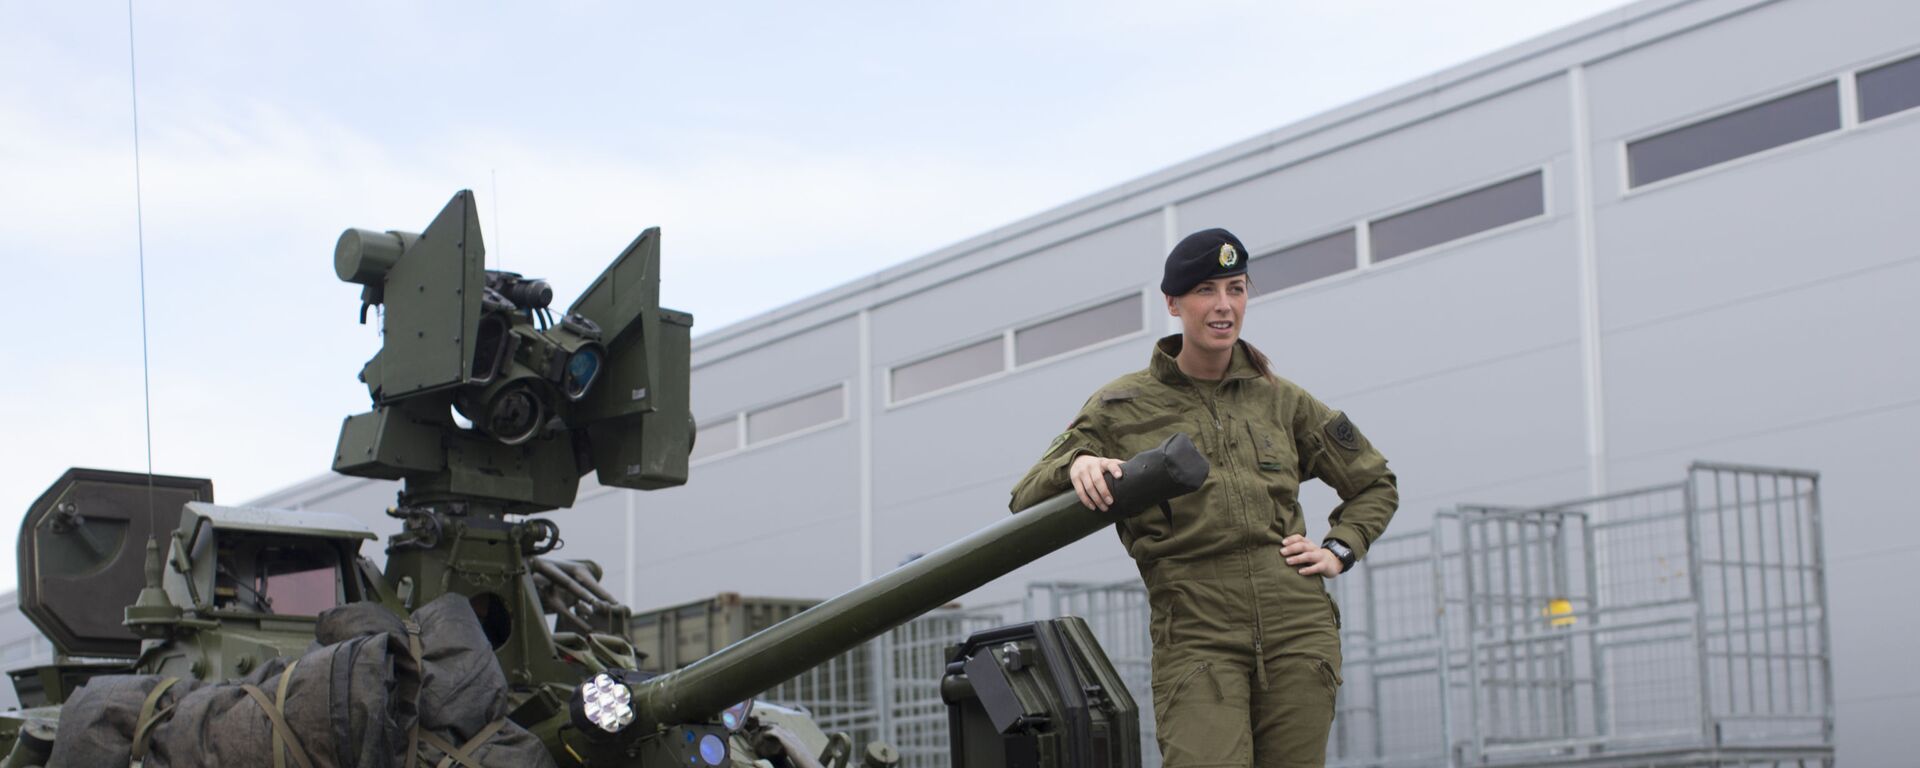 Female soldiers talk next to a CV90 combat vehicle at the armored battalion in Setermoen, northern Norway on August 11, 2016. Norway has become the first NATO member to have compulsory conscription for women as well as men in the army. Recently, the first batch of army recruits joined the ranks in The Armored Battalion in the Norwegian Army located in Setermoen in northern Norway.  - Sputnik International, 1920, 27.04.2022